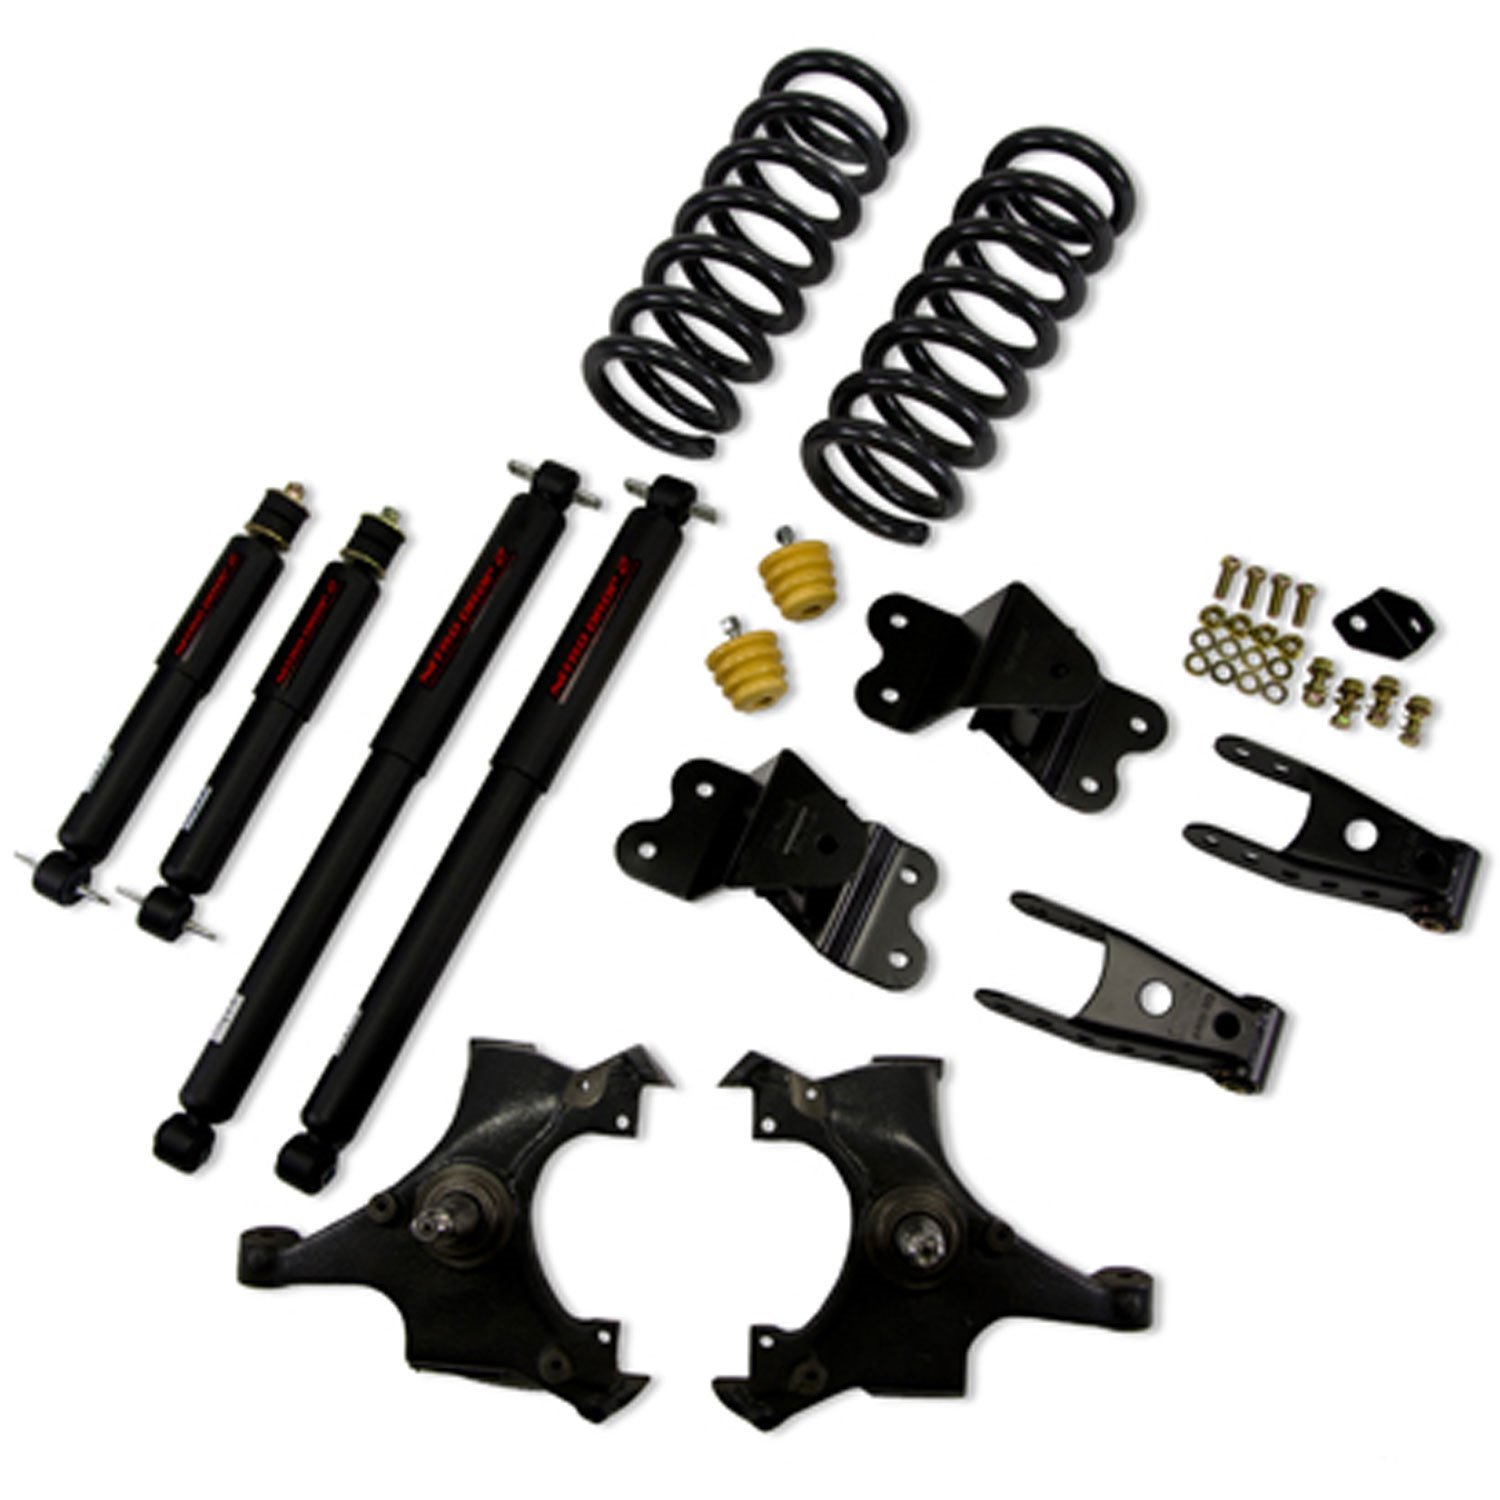 Complete Lowering Kit for 1988-1991 Chevy/GMC 1500 Standard